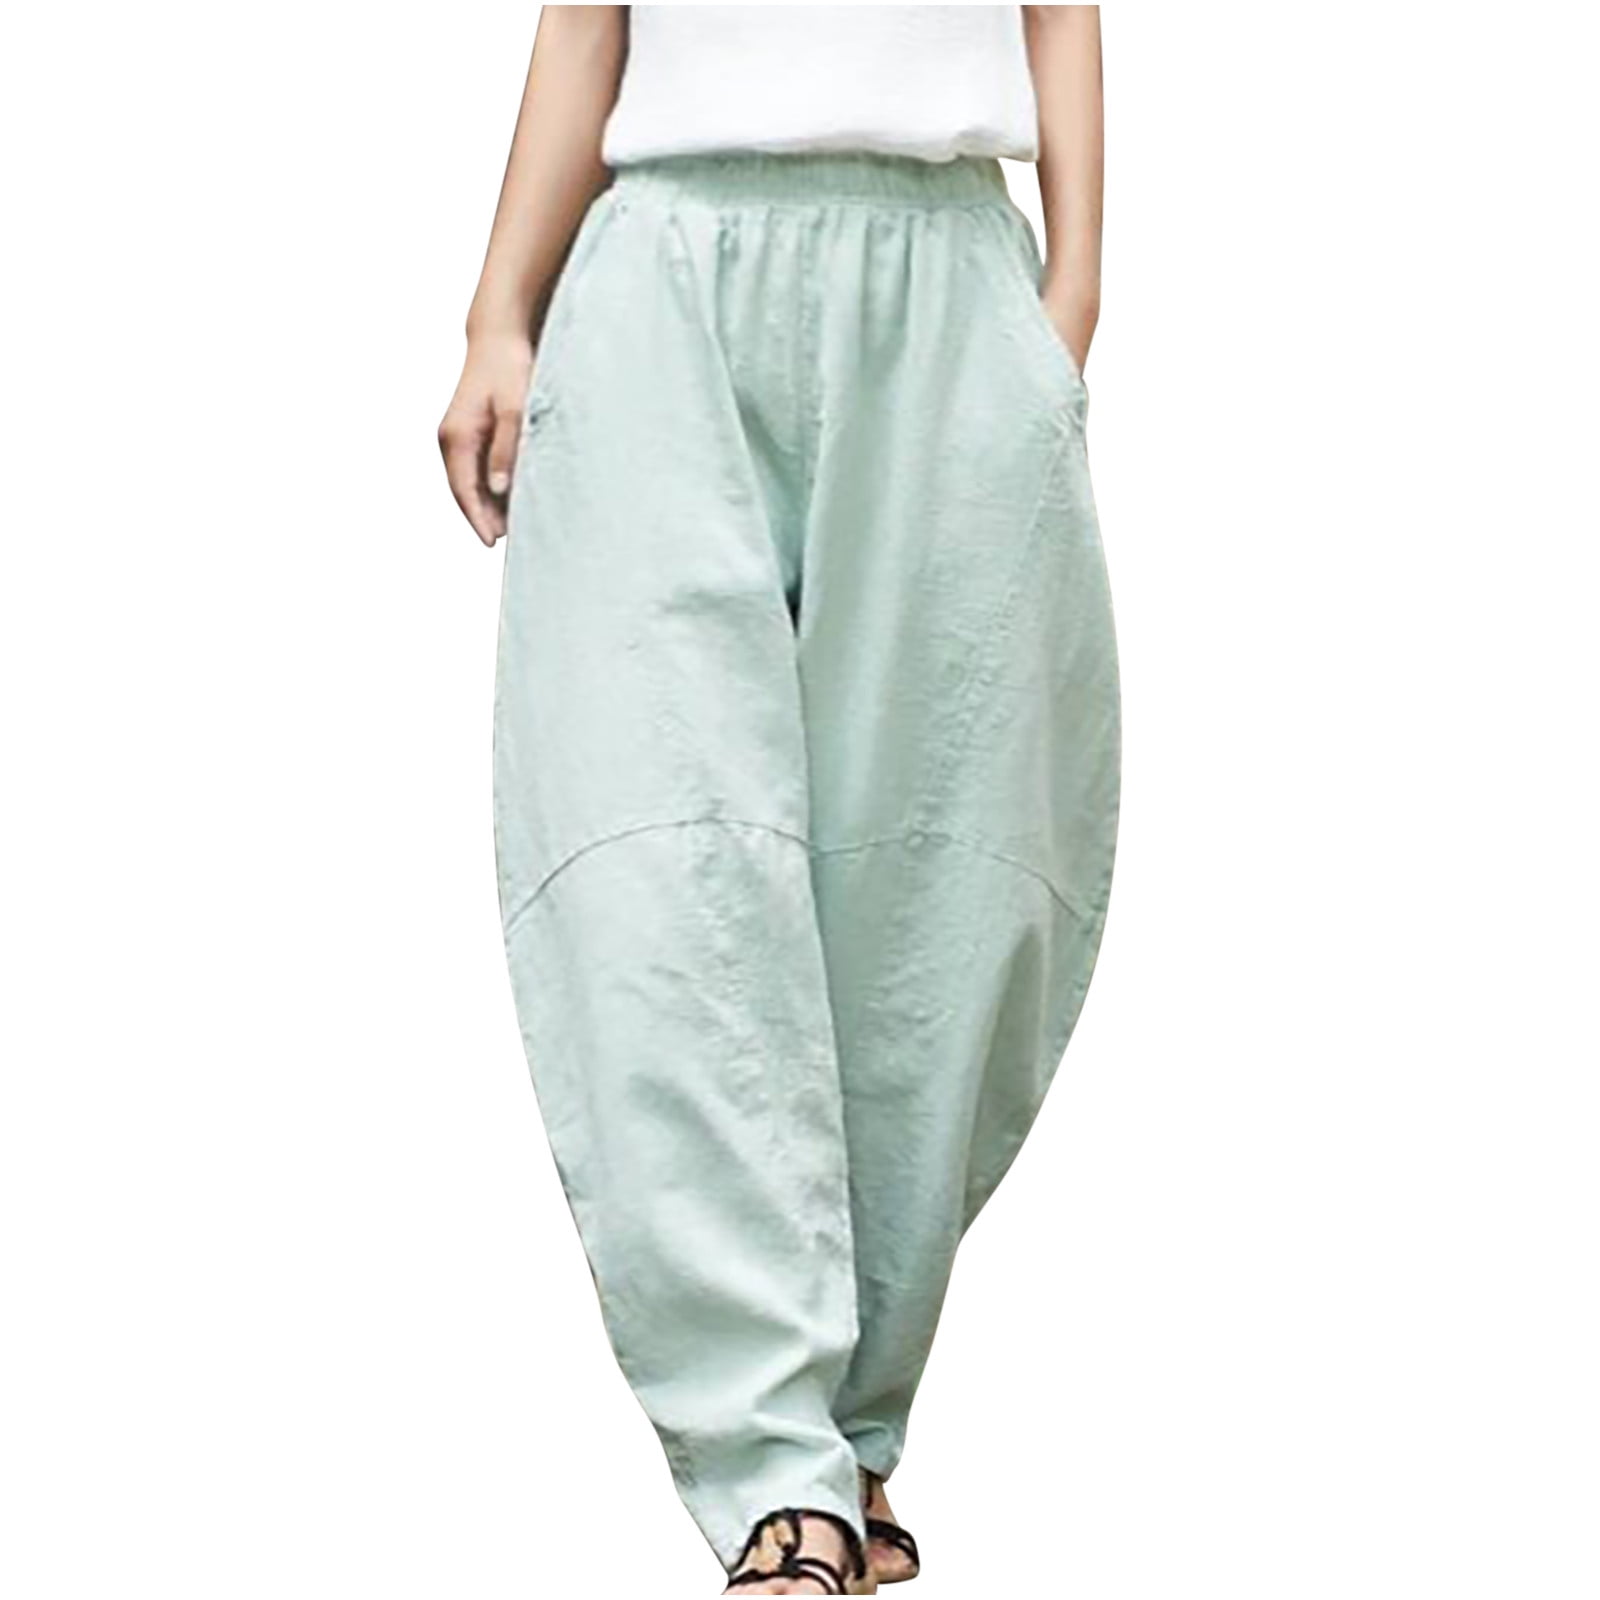 JWZUY Women's Casual Cotton Linen Slouchy Baggy Pants with Elastic Waist  Relax Fit Lantern Trouser Loose Leisure Summer Pants Mint Green L